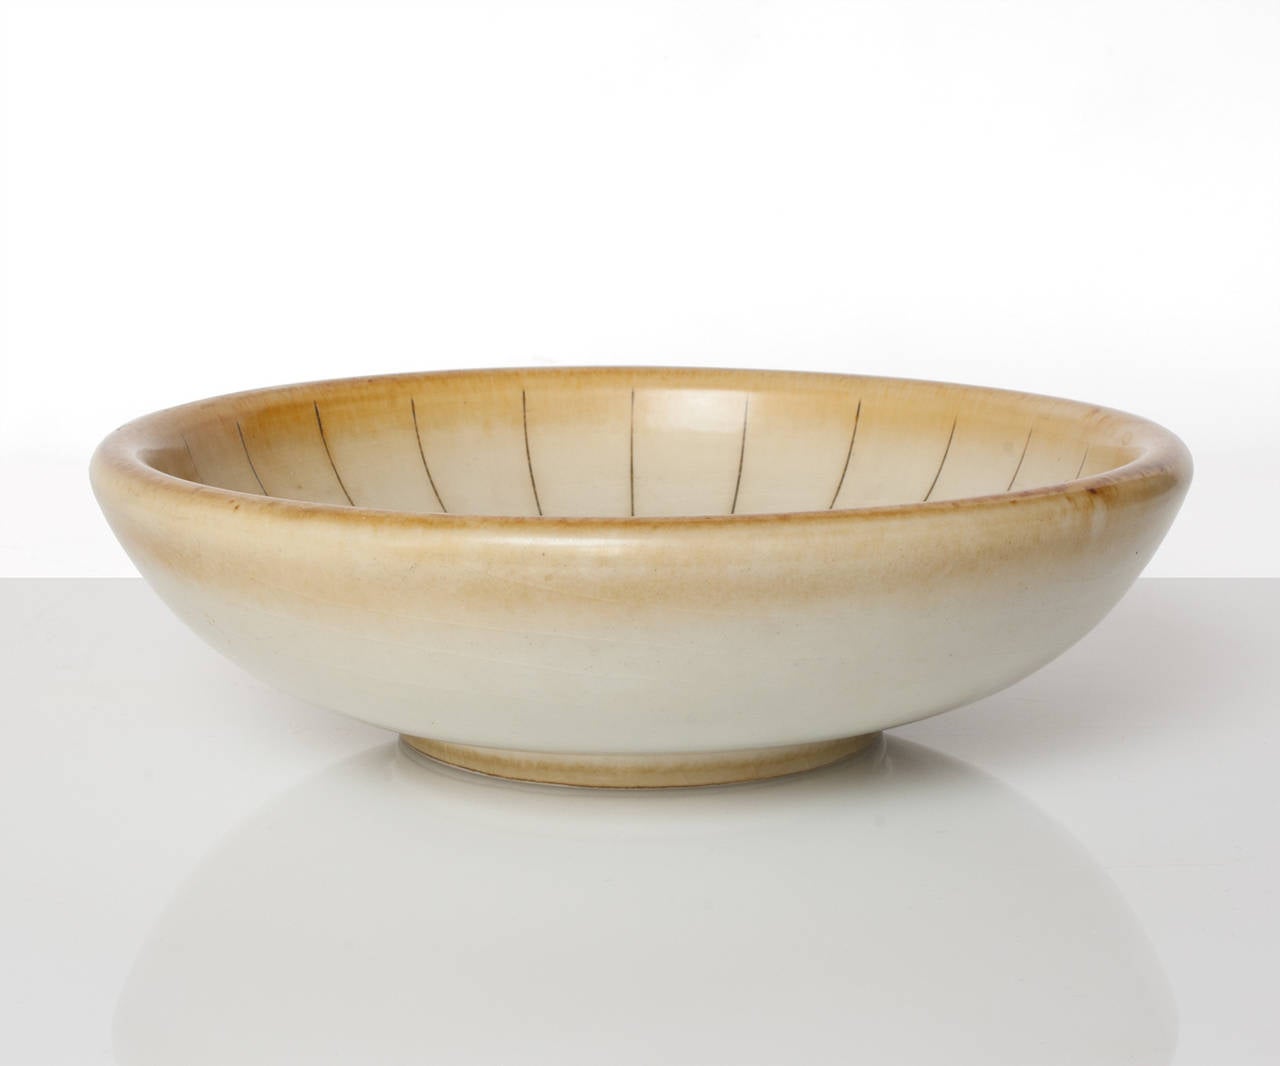 A Scandinavian Modern, Swedish Art Deco ceramic footed bowl in a pale golden glaze with incised lines. Made by Gertrud Lönegren at the Rorstrand studios. Measures: Diameter 9.75